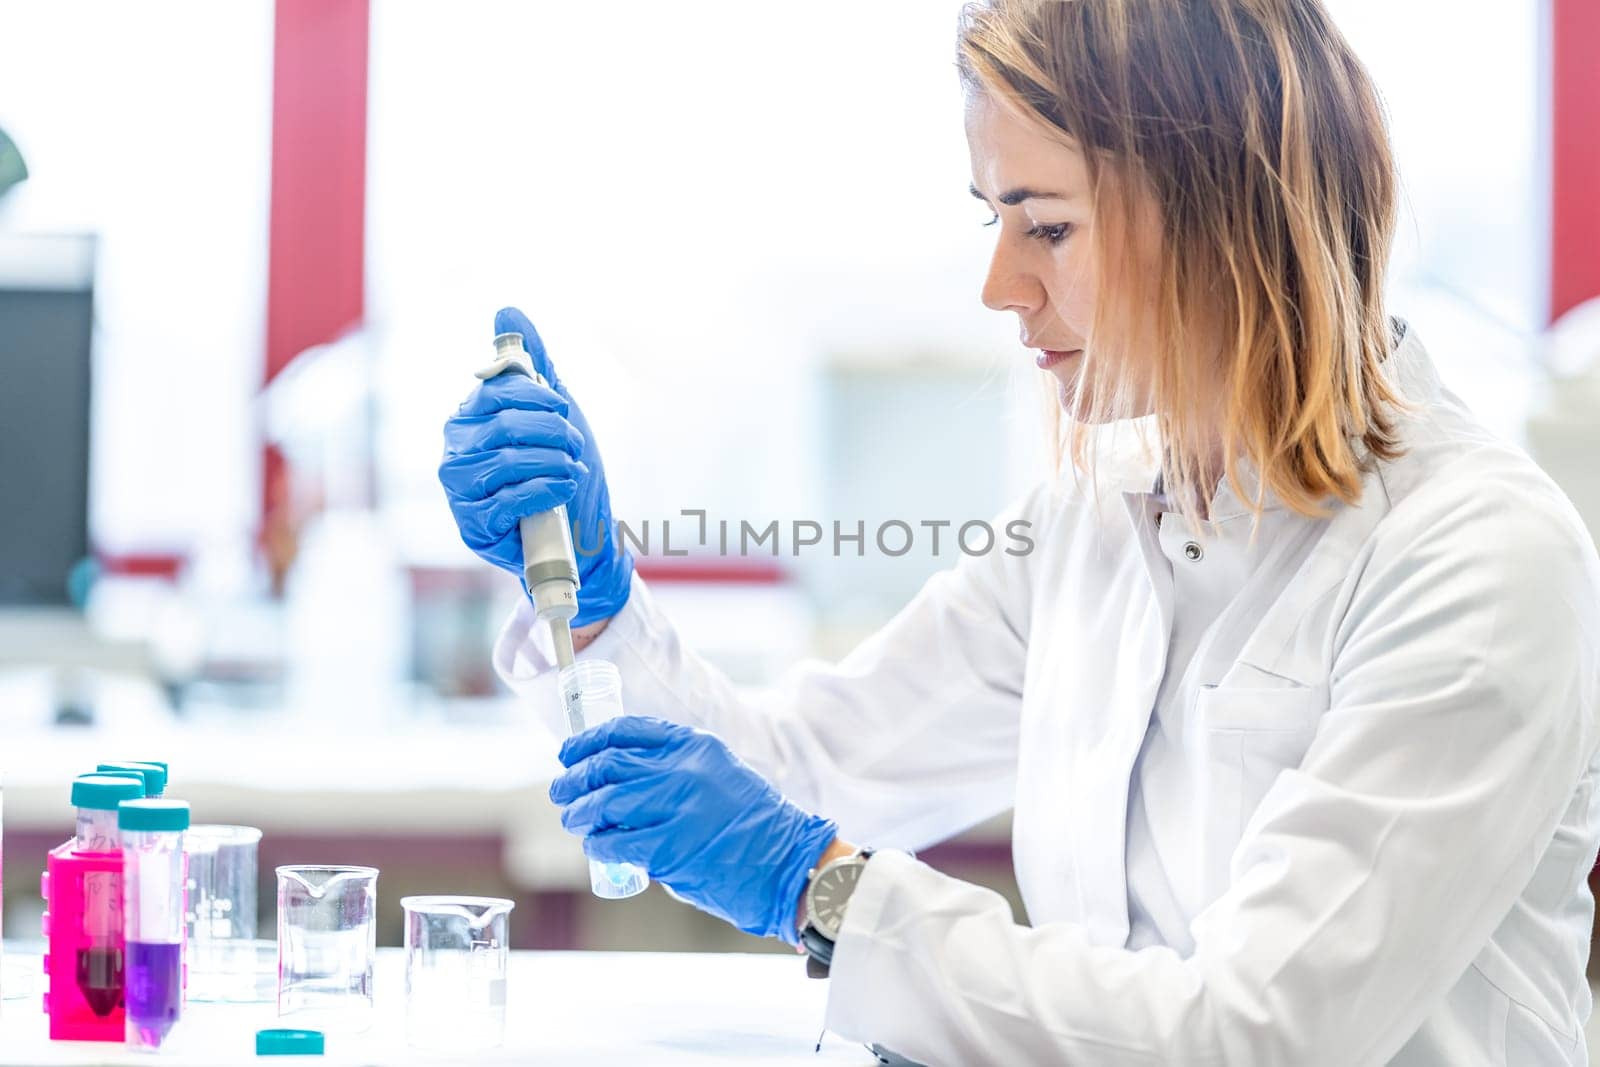 mixing of chemical substances by a young female scientist in a university research laboratory. development of new drugs and products.